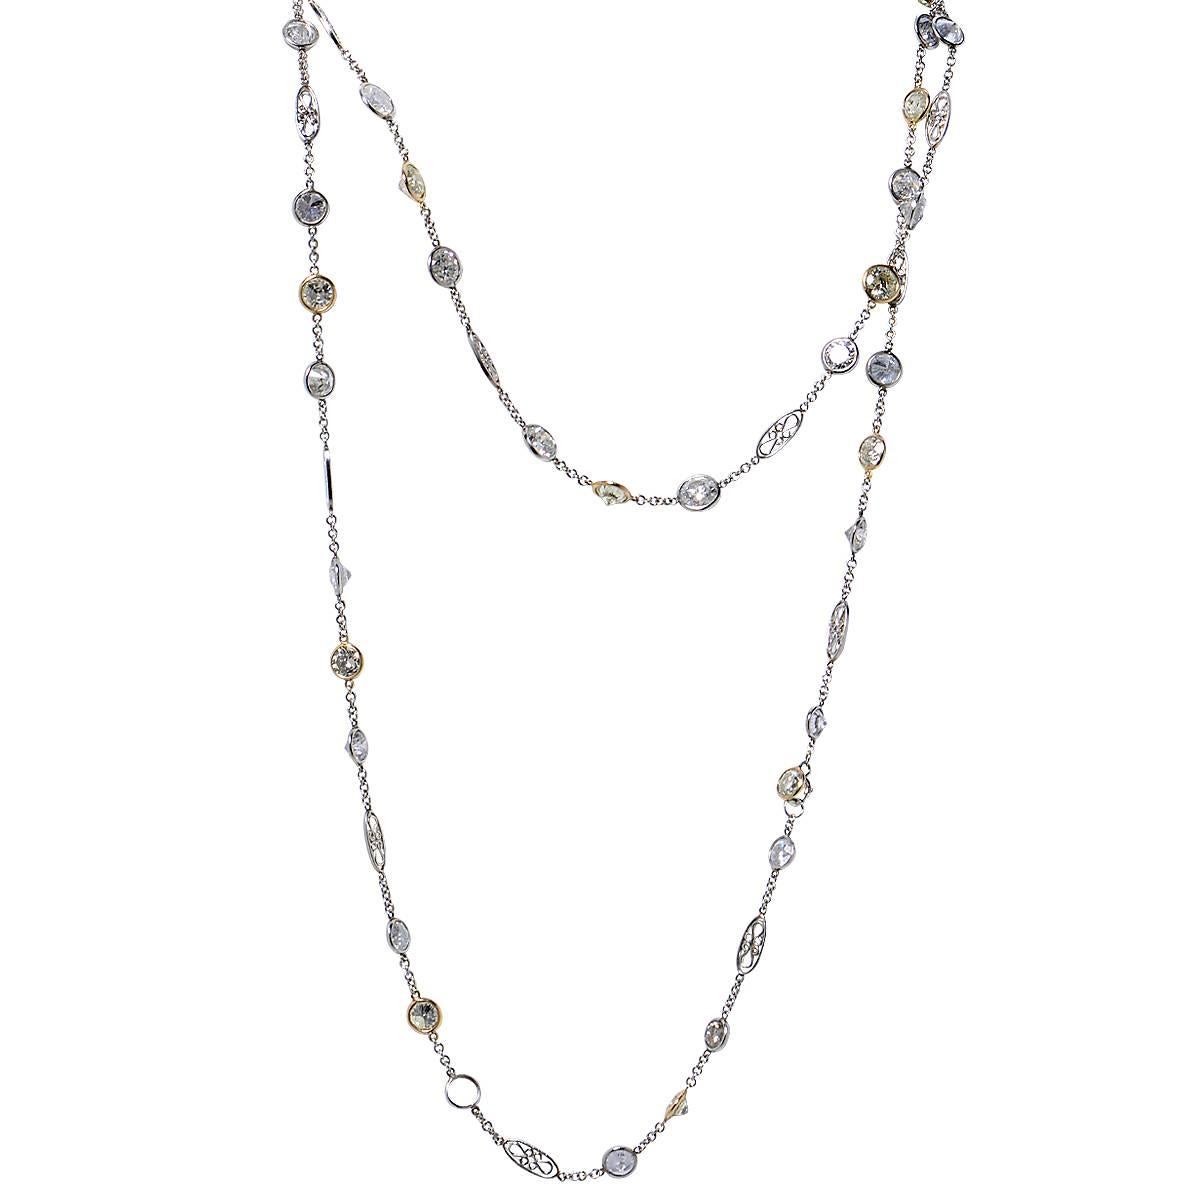 Stunning Diamonds by the Yard necklace crafted in platinum, featuring 54 round brilliant cut white and yellow diamonds weighing approximately 35.35 carats total, SI-I clarity. This Jazz Diva inspired necklace measures 42 inches length and weighs